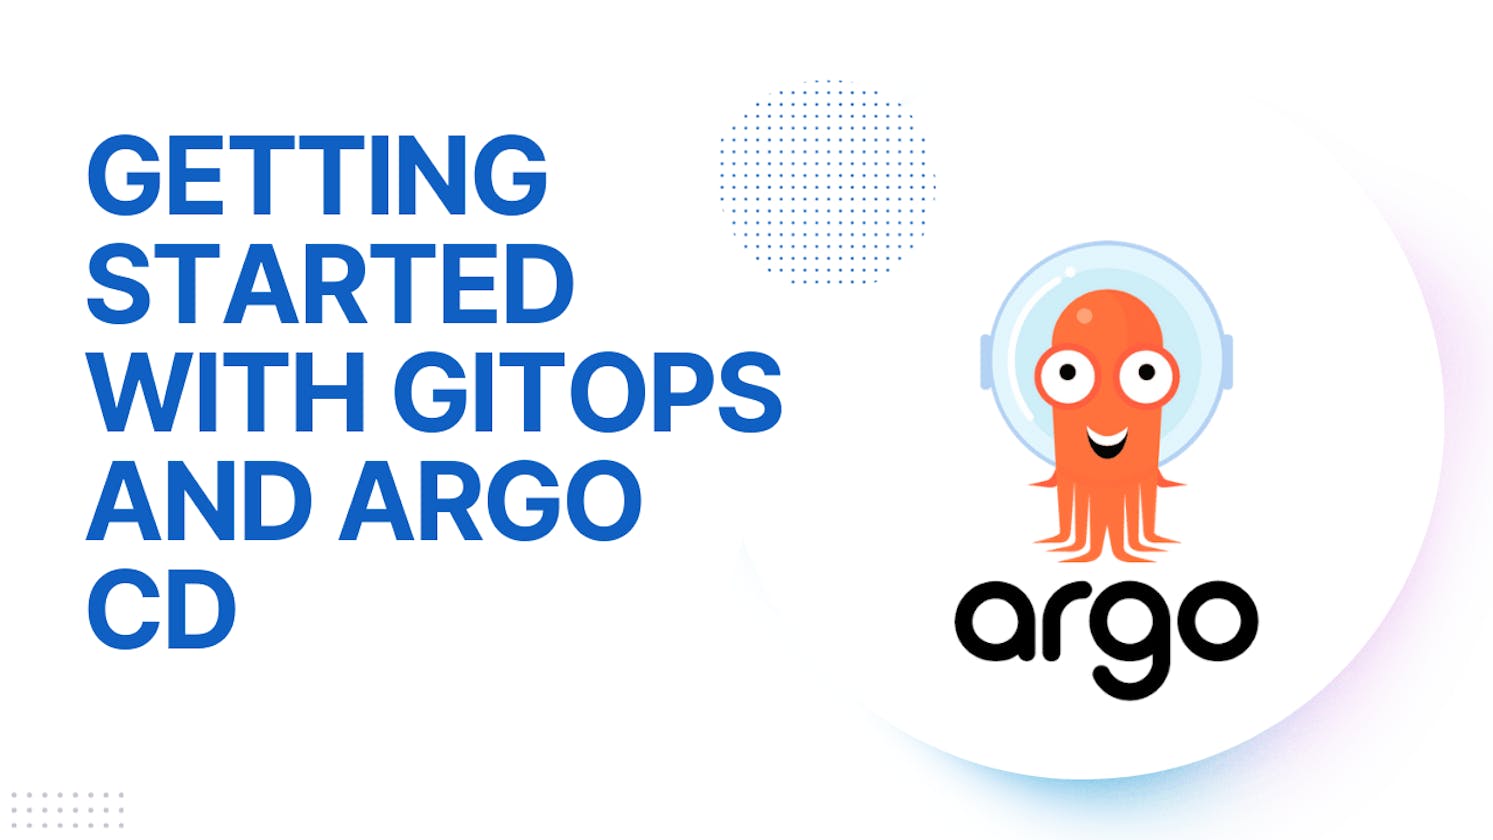 Getting started with GitOps and Argo CD